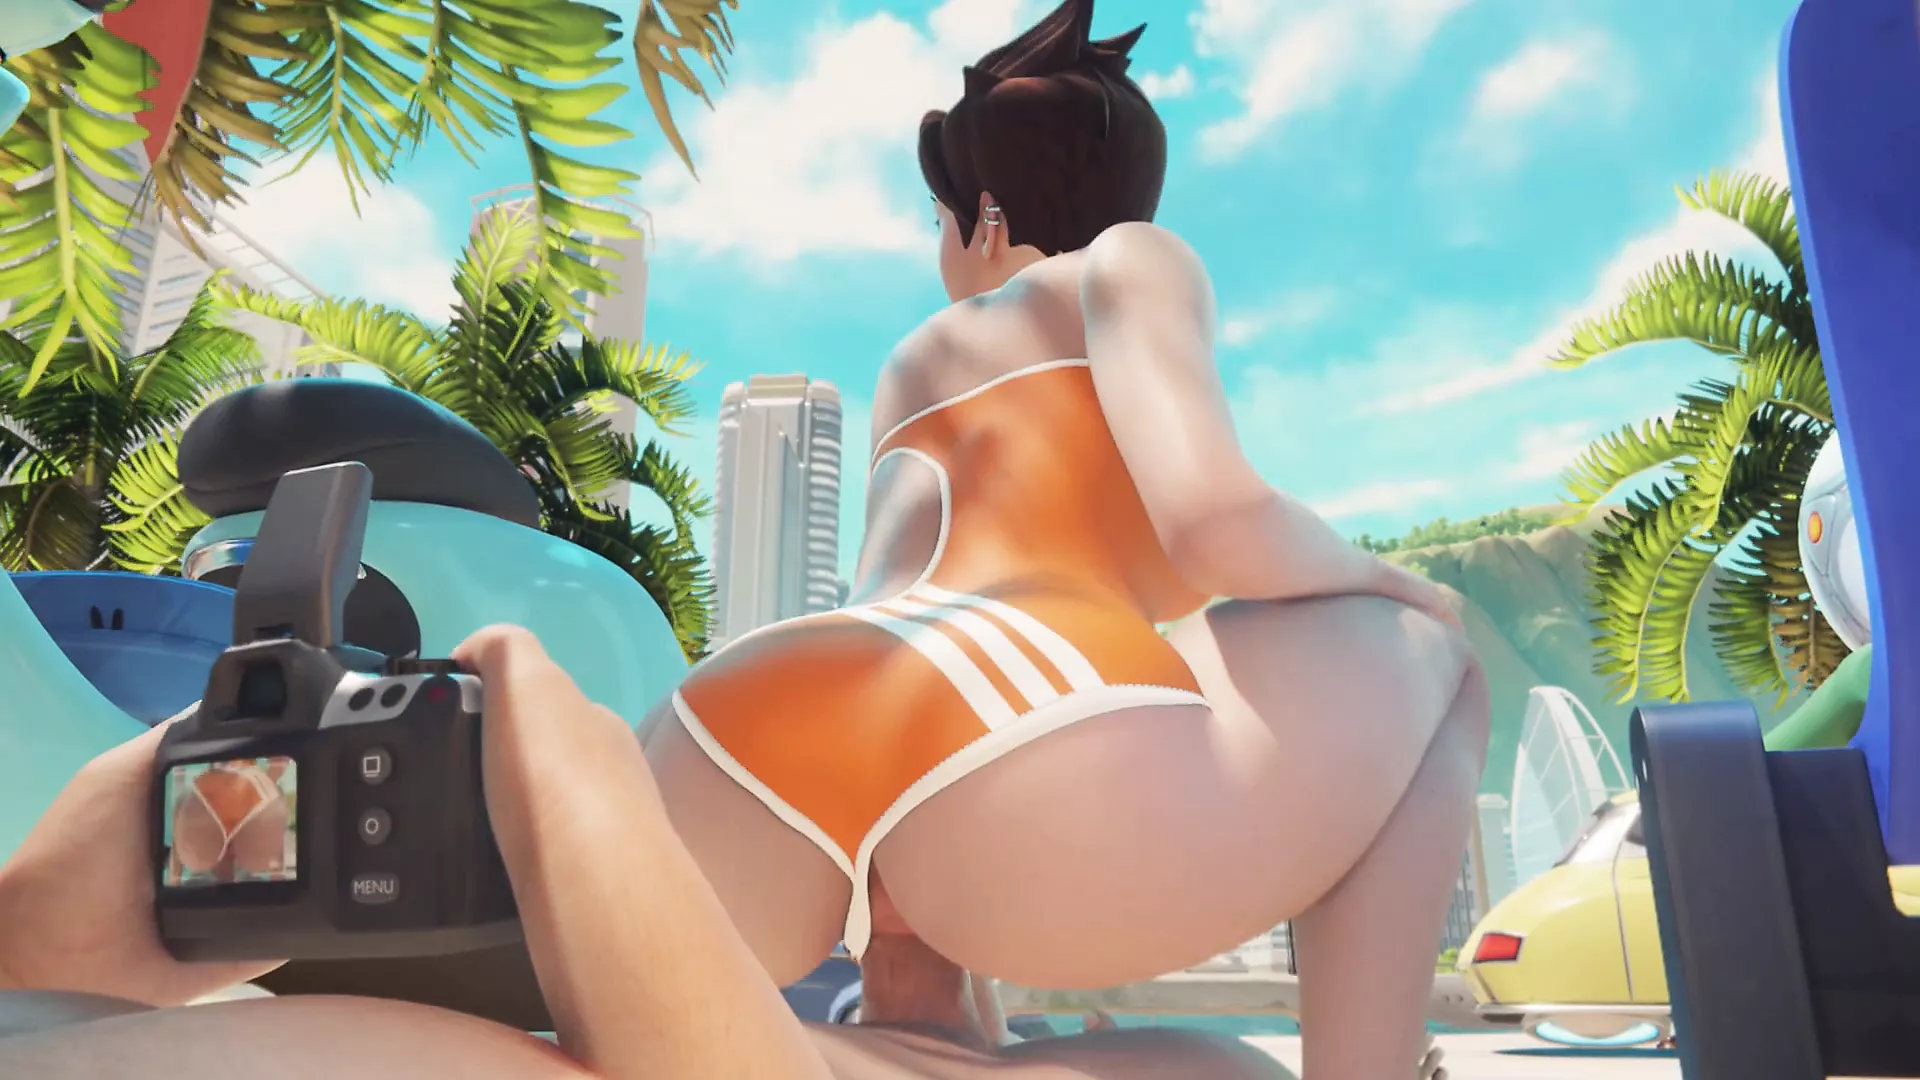 Overwatch Porn 3D Animation Compilation 92: Free HD Porn 63